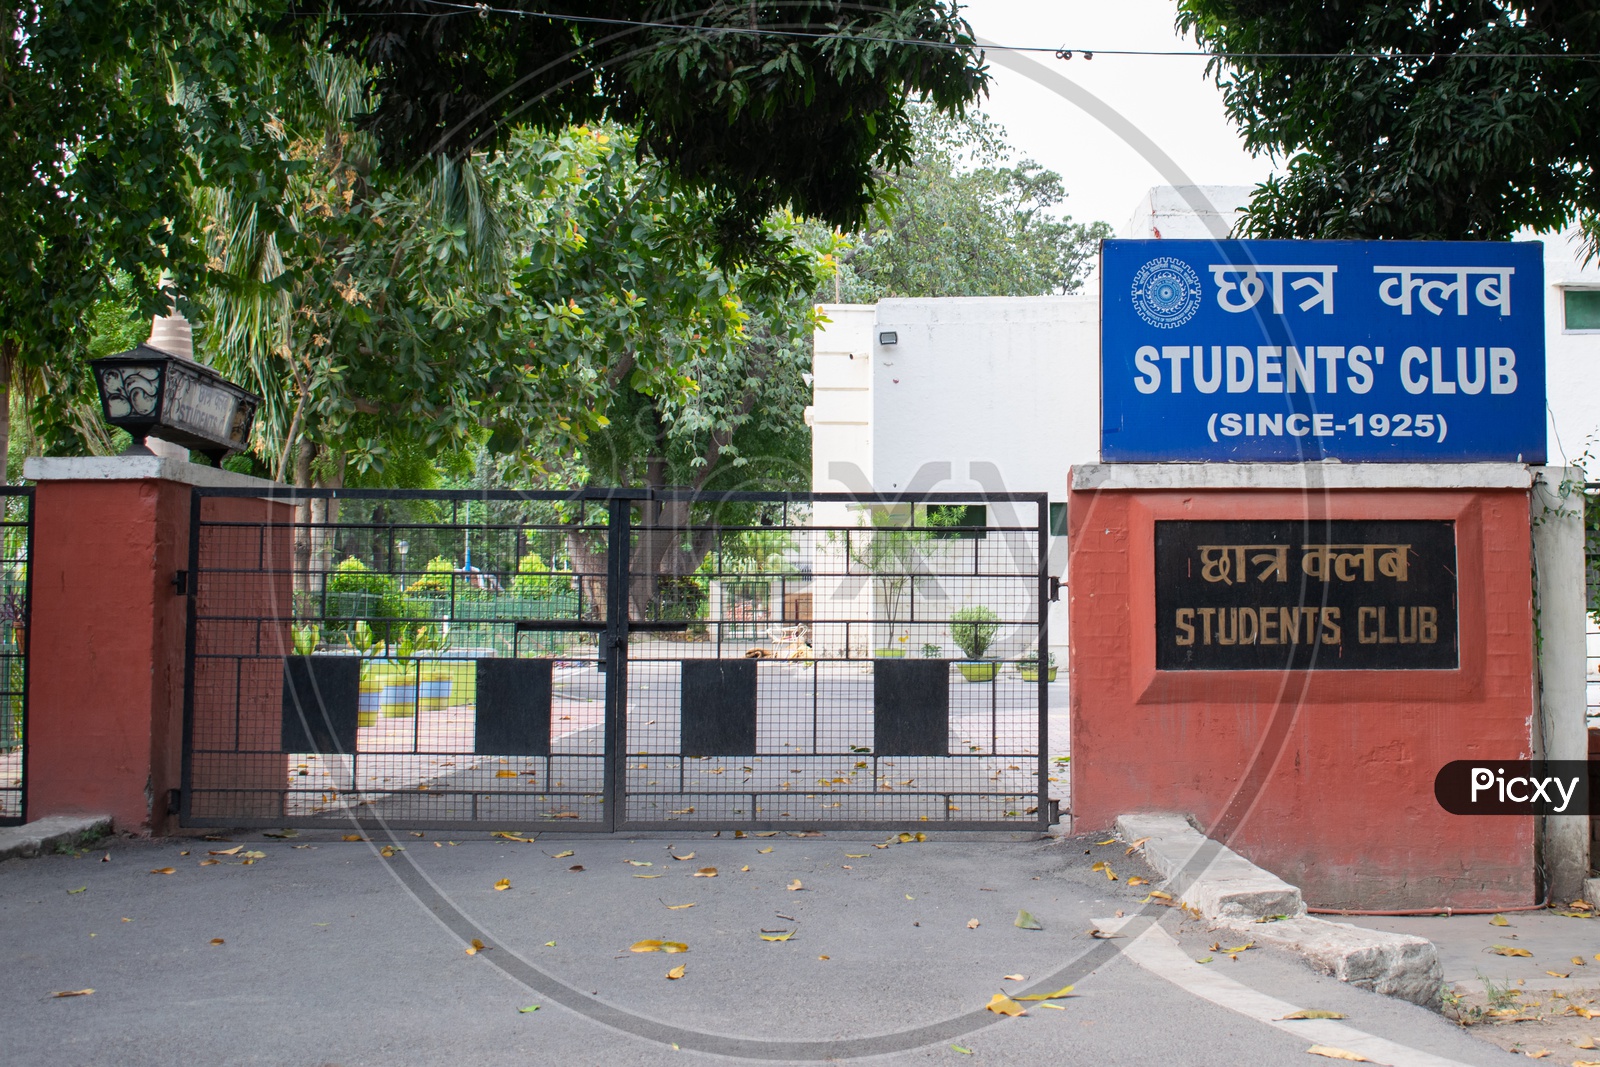 Students Club, Indian Institute of Technology Roorkee(IIT Roorkee)